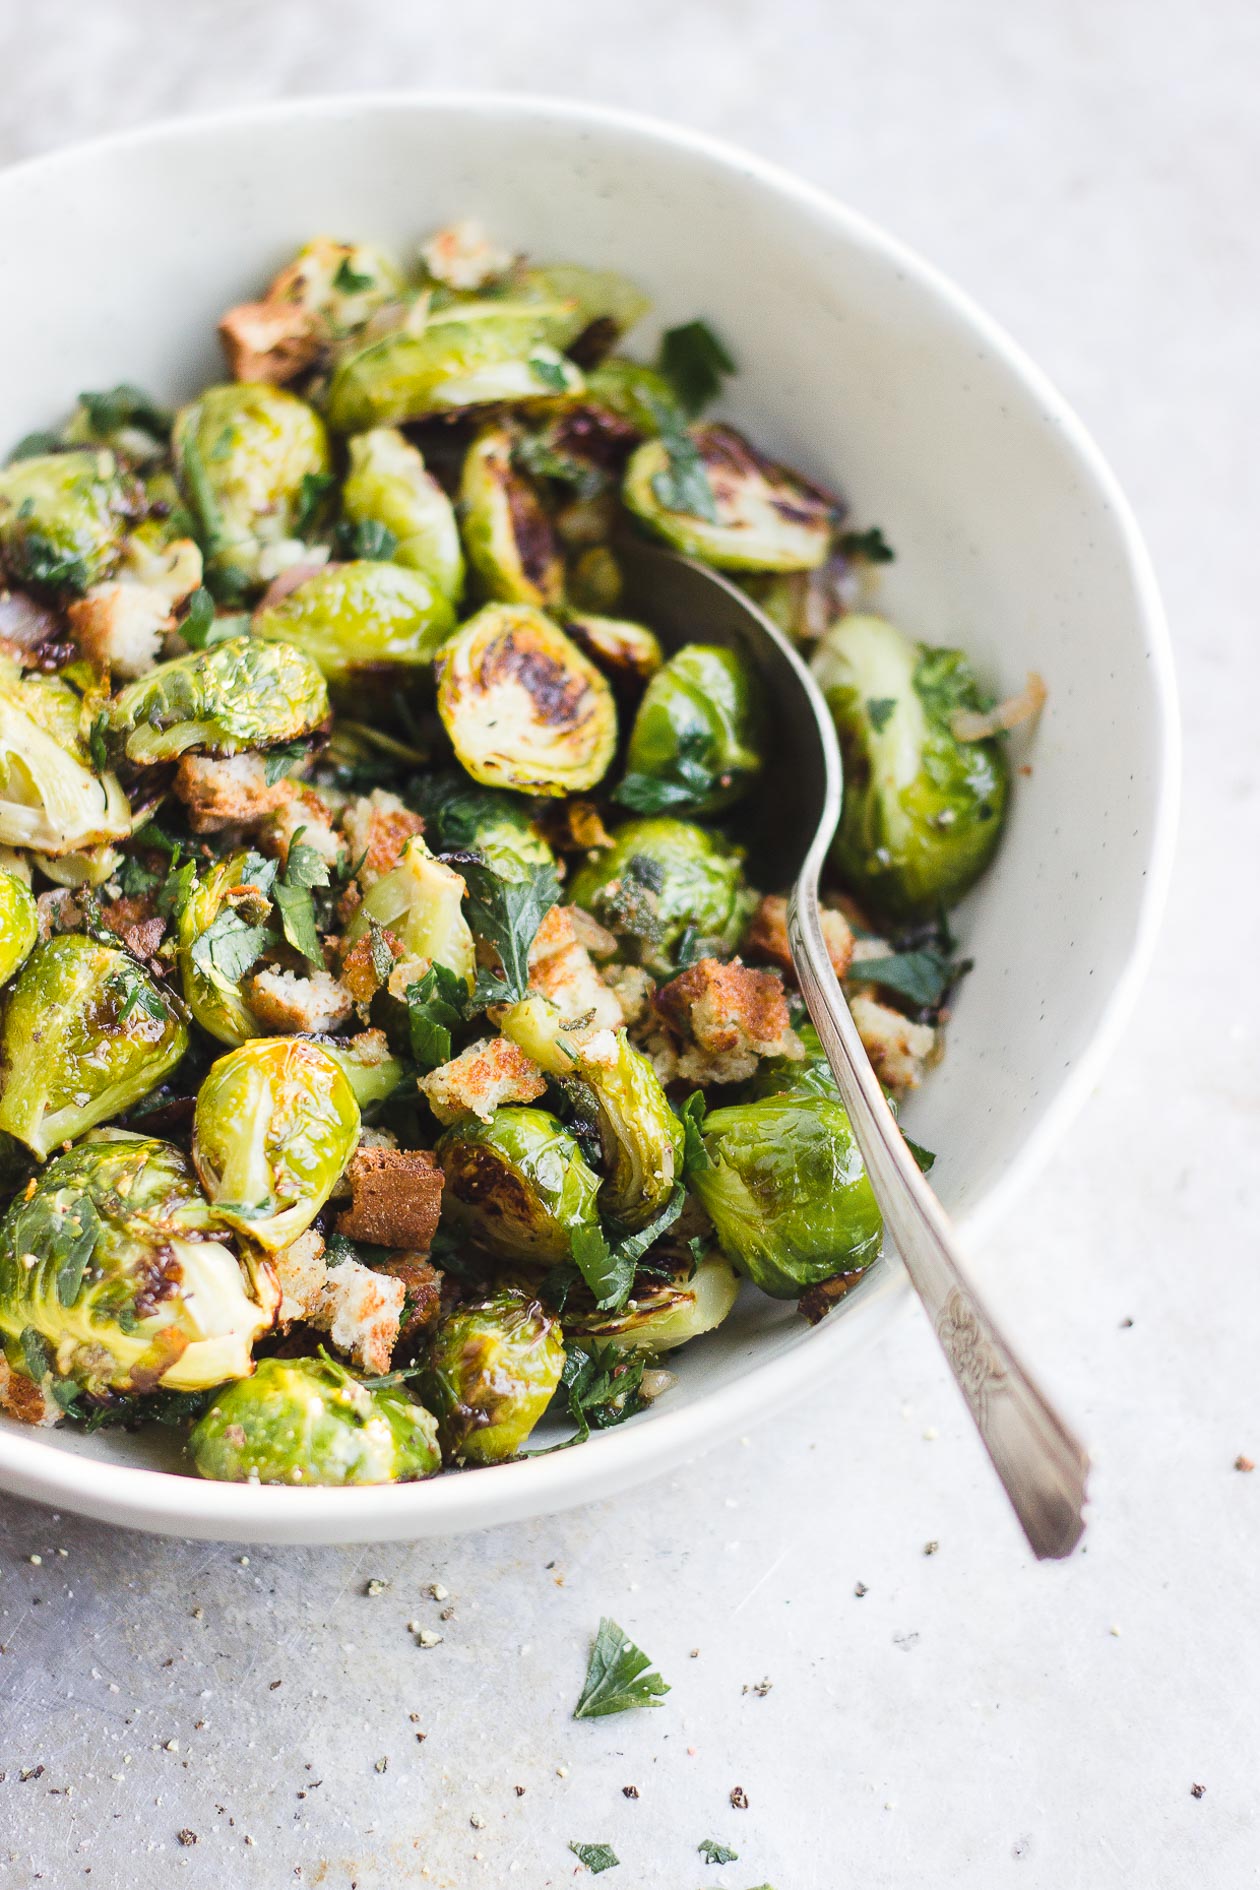 BRUSSELS SPROUTS WITH BREAD CRUMBS AND SAGE